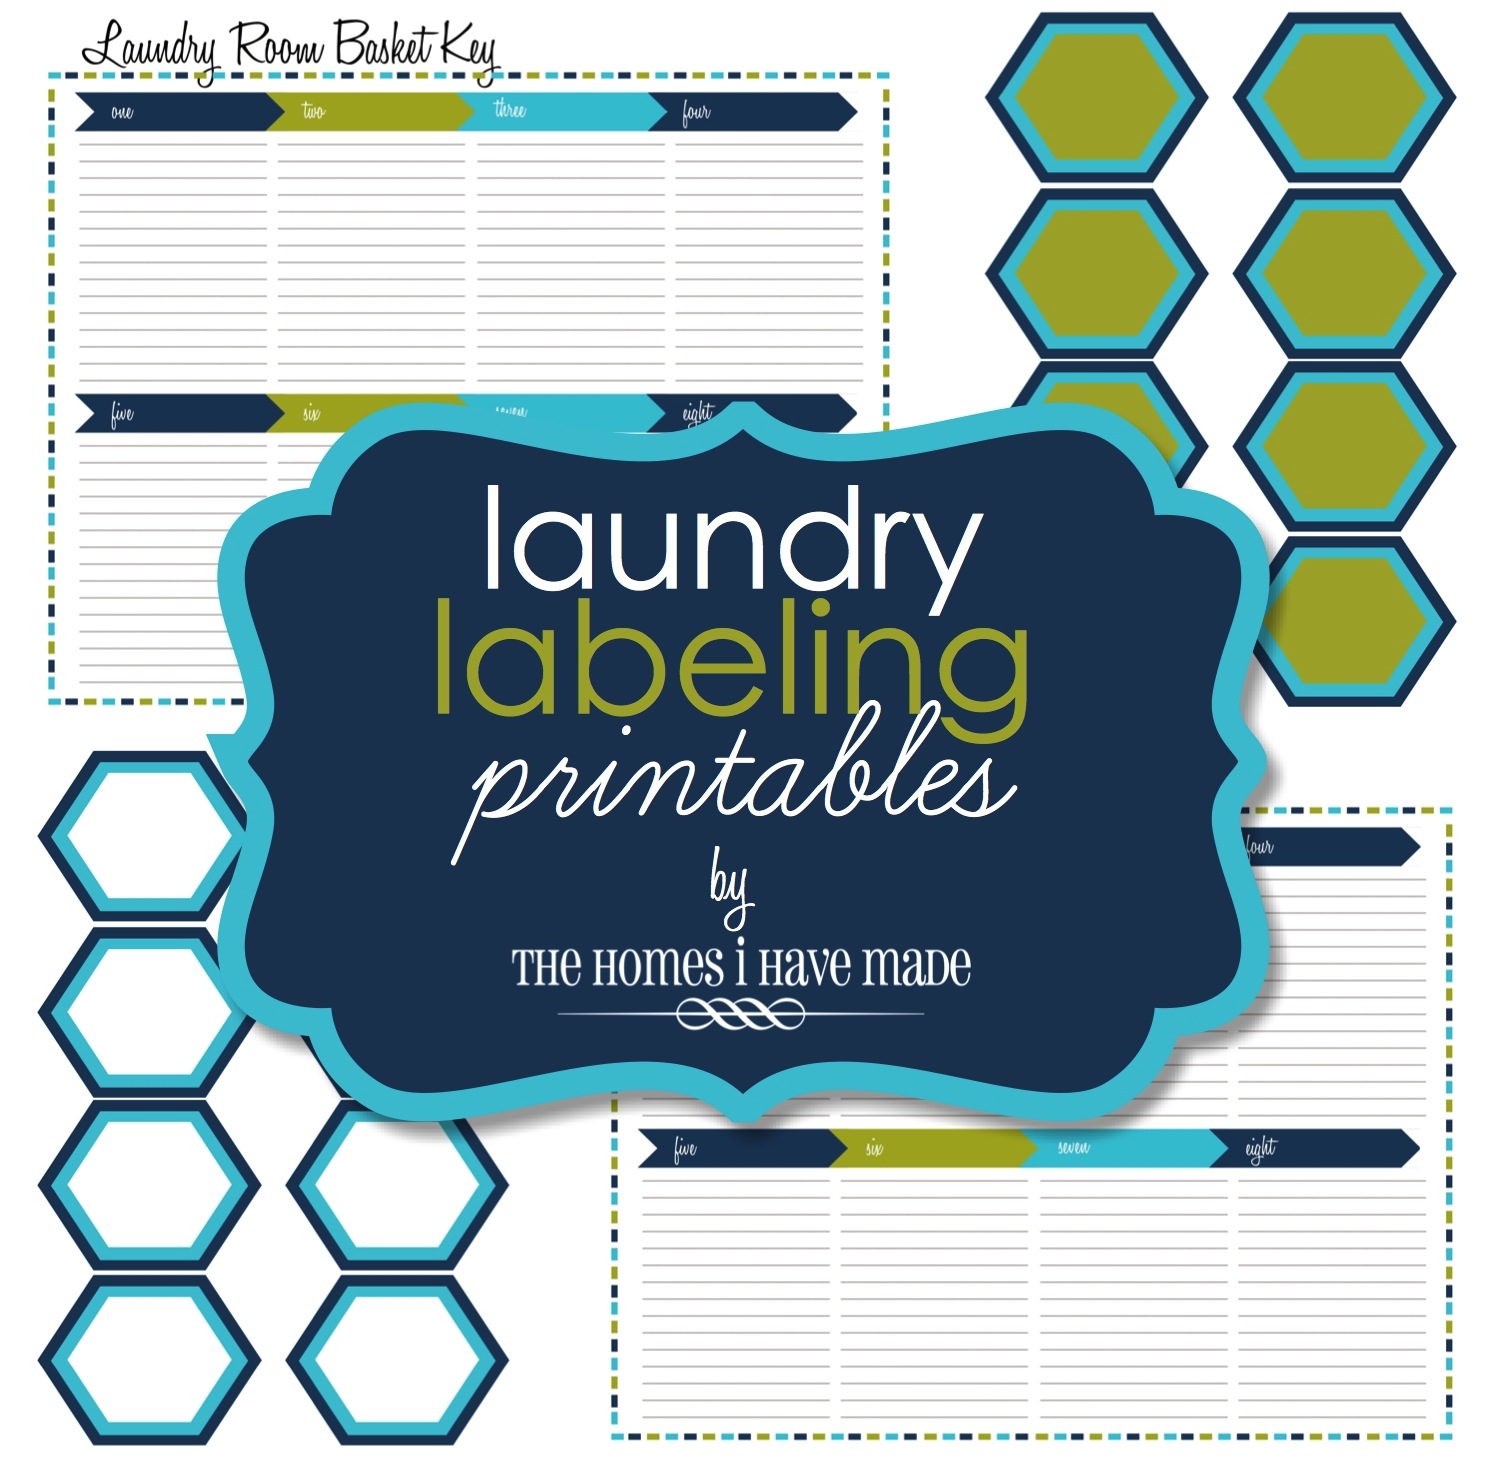 laundry labeling printables the homes i have made